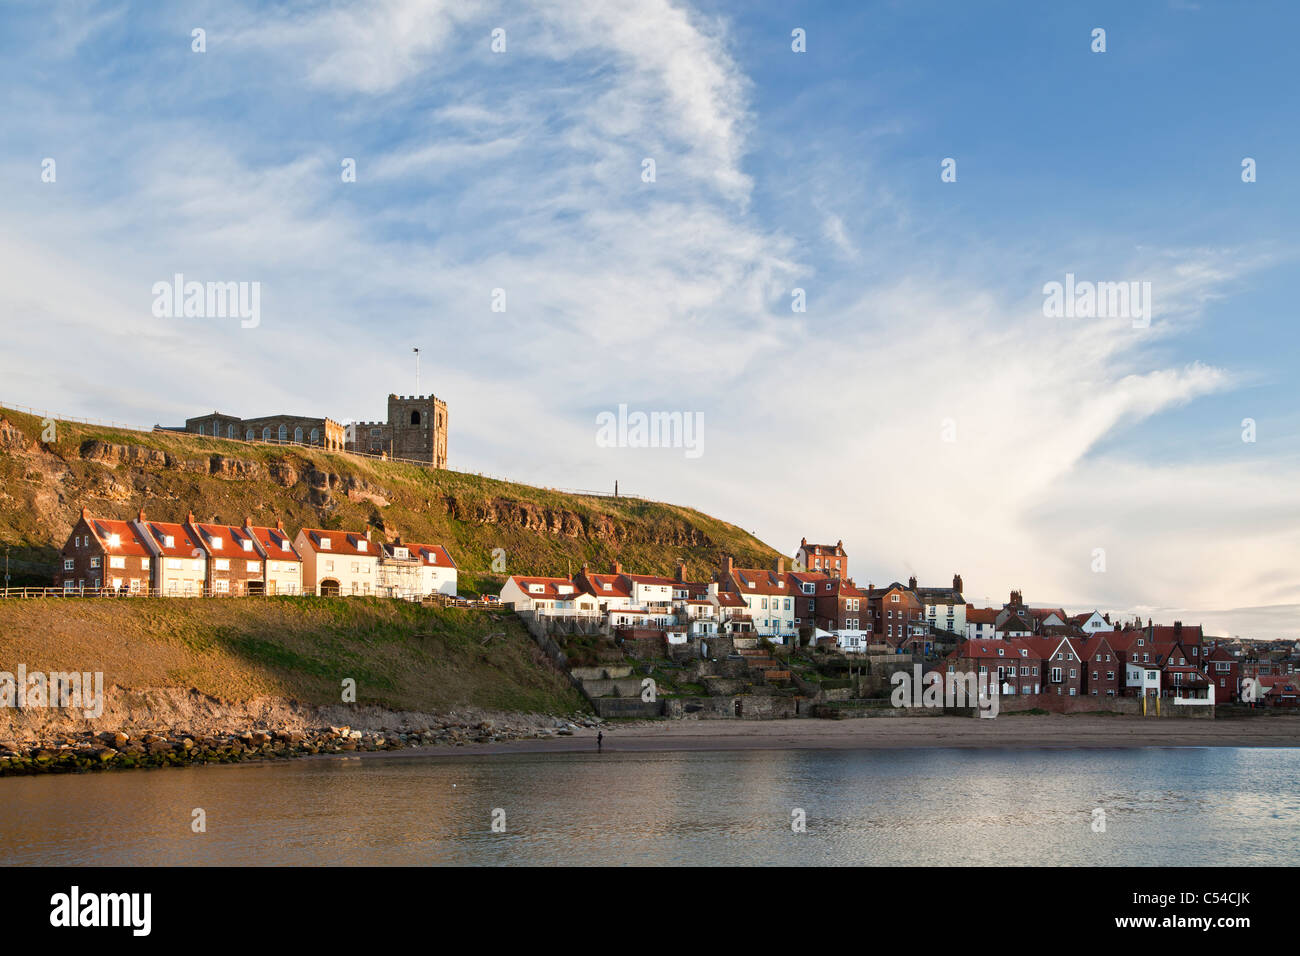 St Mary's Church on the East cliff in Whitby, North Yorkshire. Stock Photo